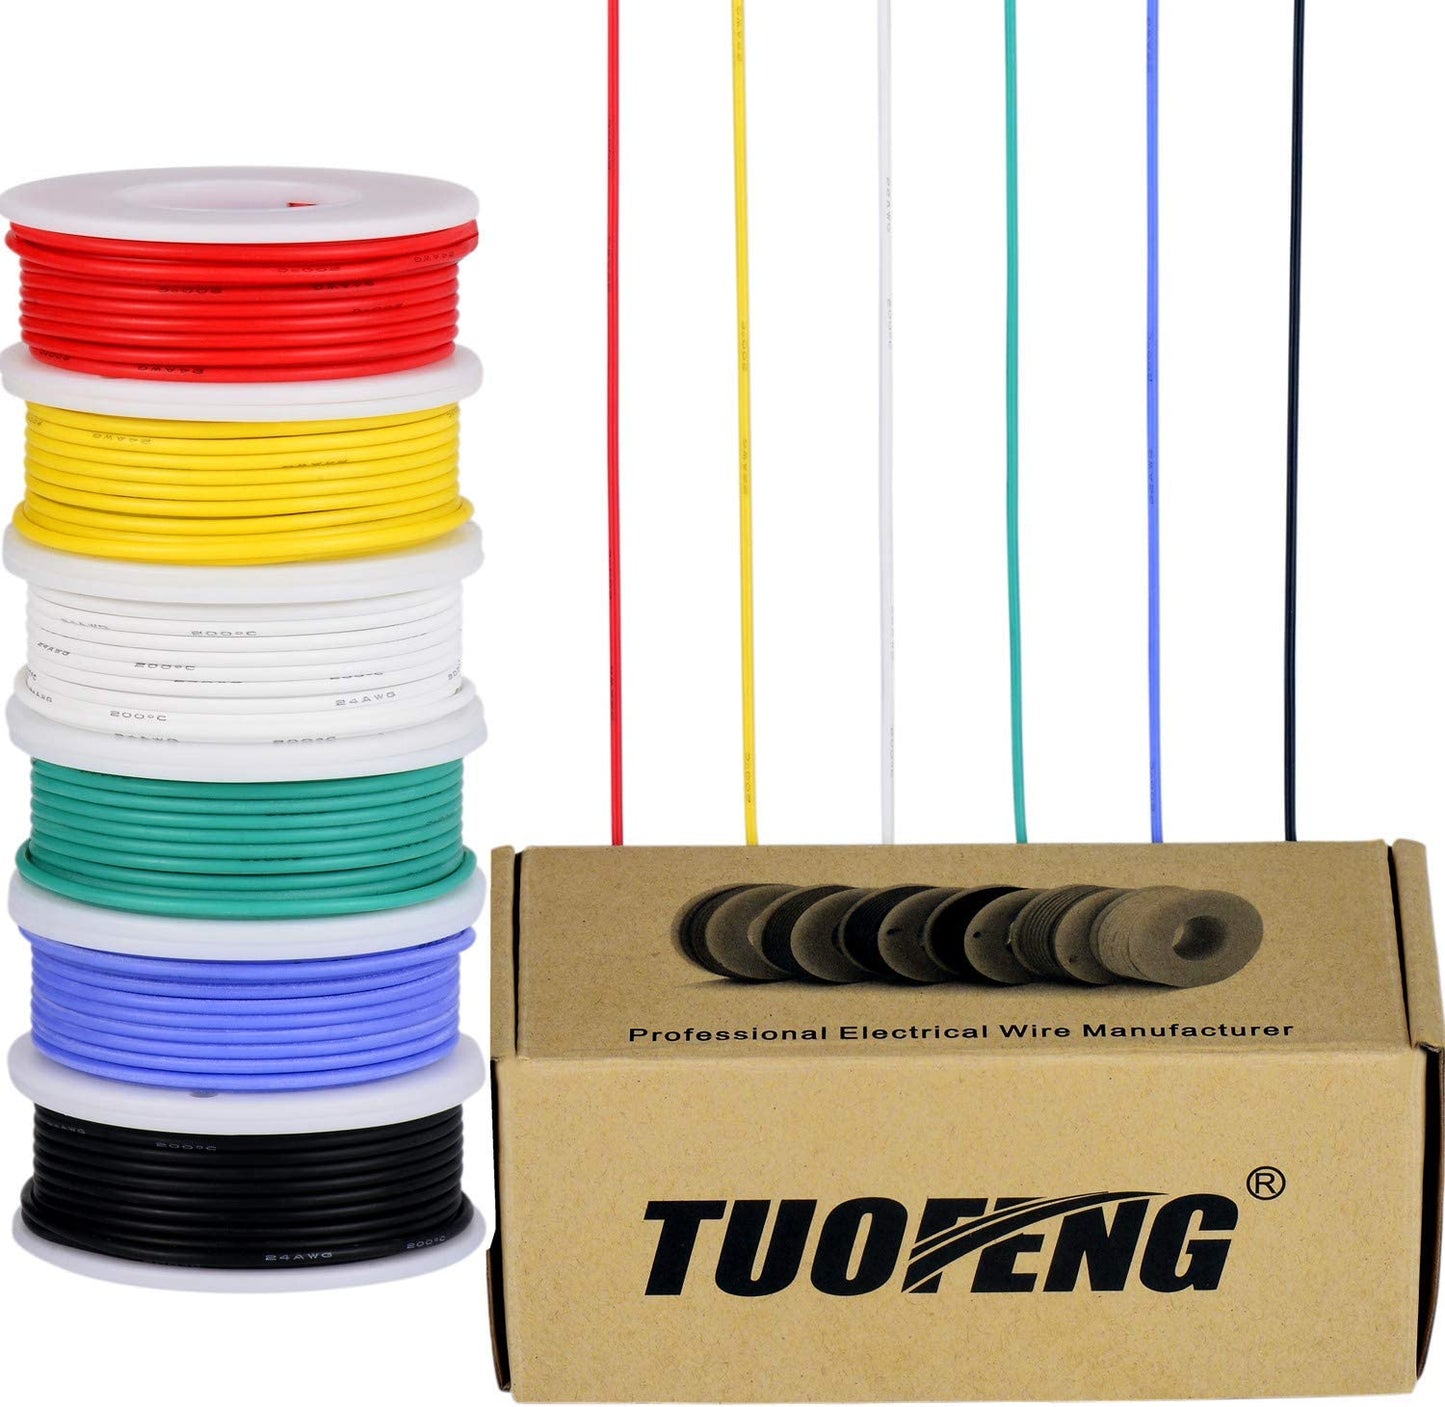 TUOFENG 22 awg Solid Wire-Solid Wire Kit-6 different colored 30 Feet spools  22 gauge Jumper wire- Hook up Wire Kit 